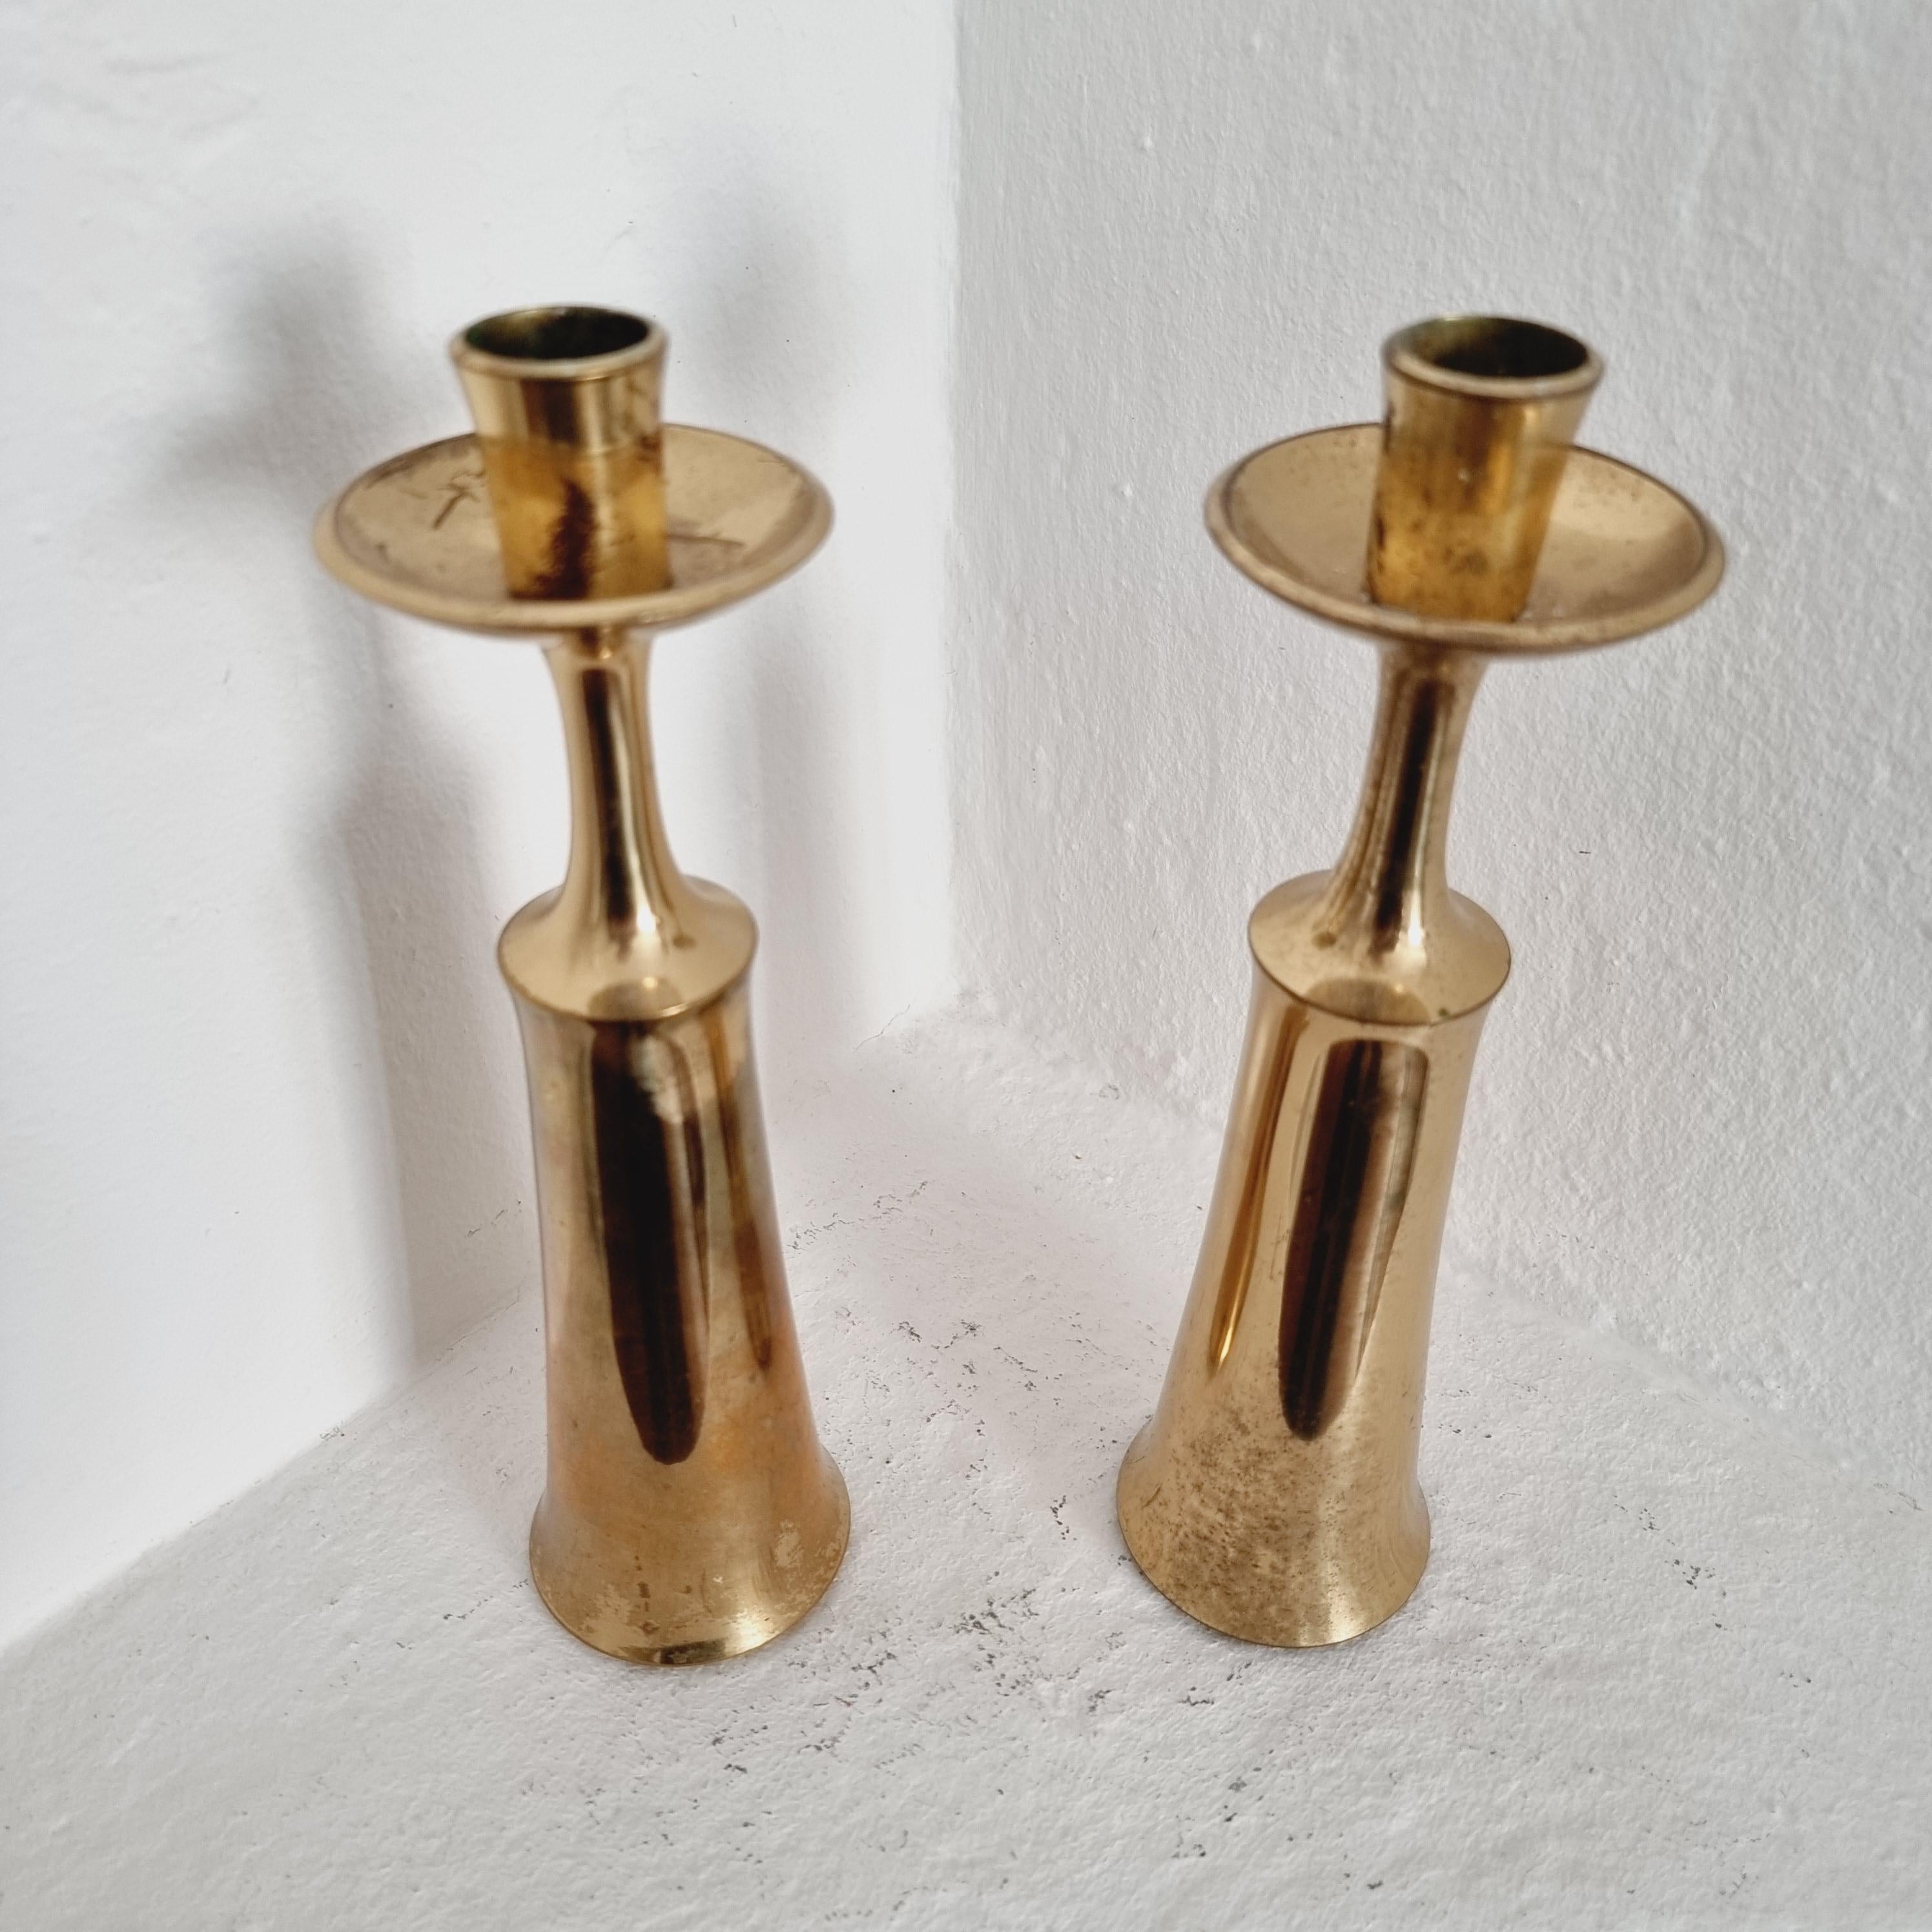 A pair of solid brass candlesticks in an tall, elegant design. By Jens Quistgaard for Dansk Design, Denmark, Midcentury Modern.


Hallmark inside holders. Patina, signs of age and wear. Smaller dents and color shifts.